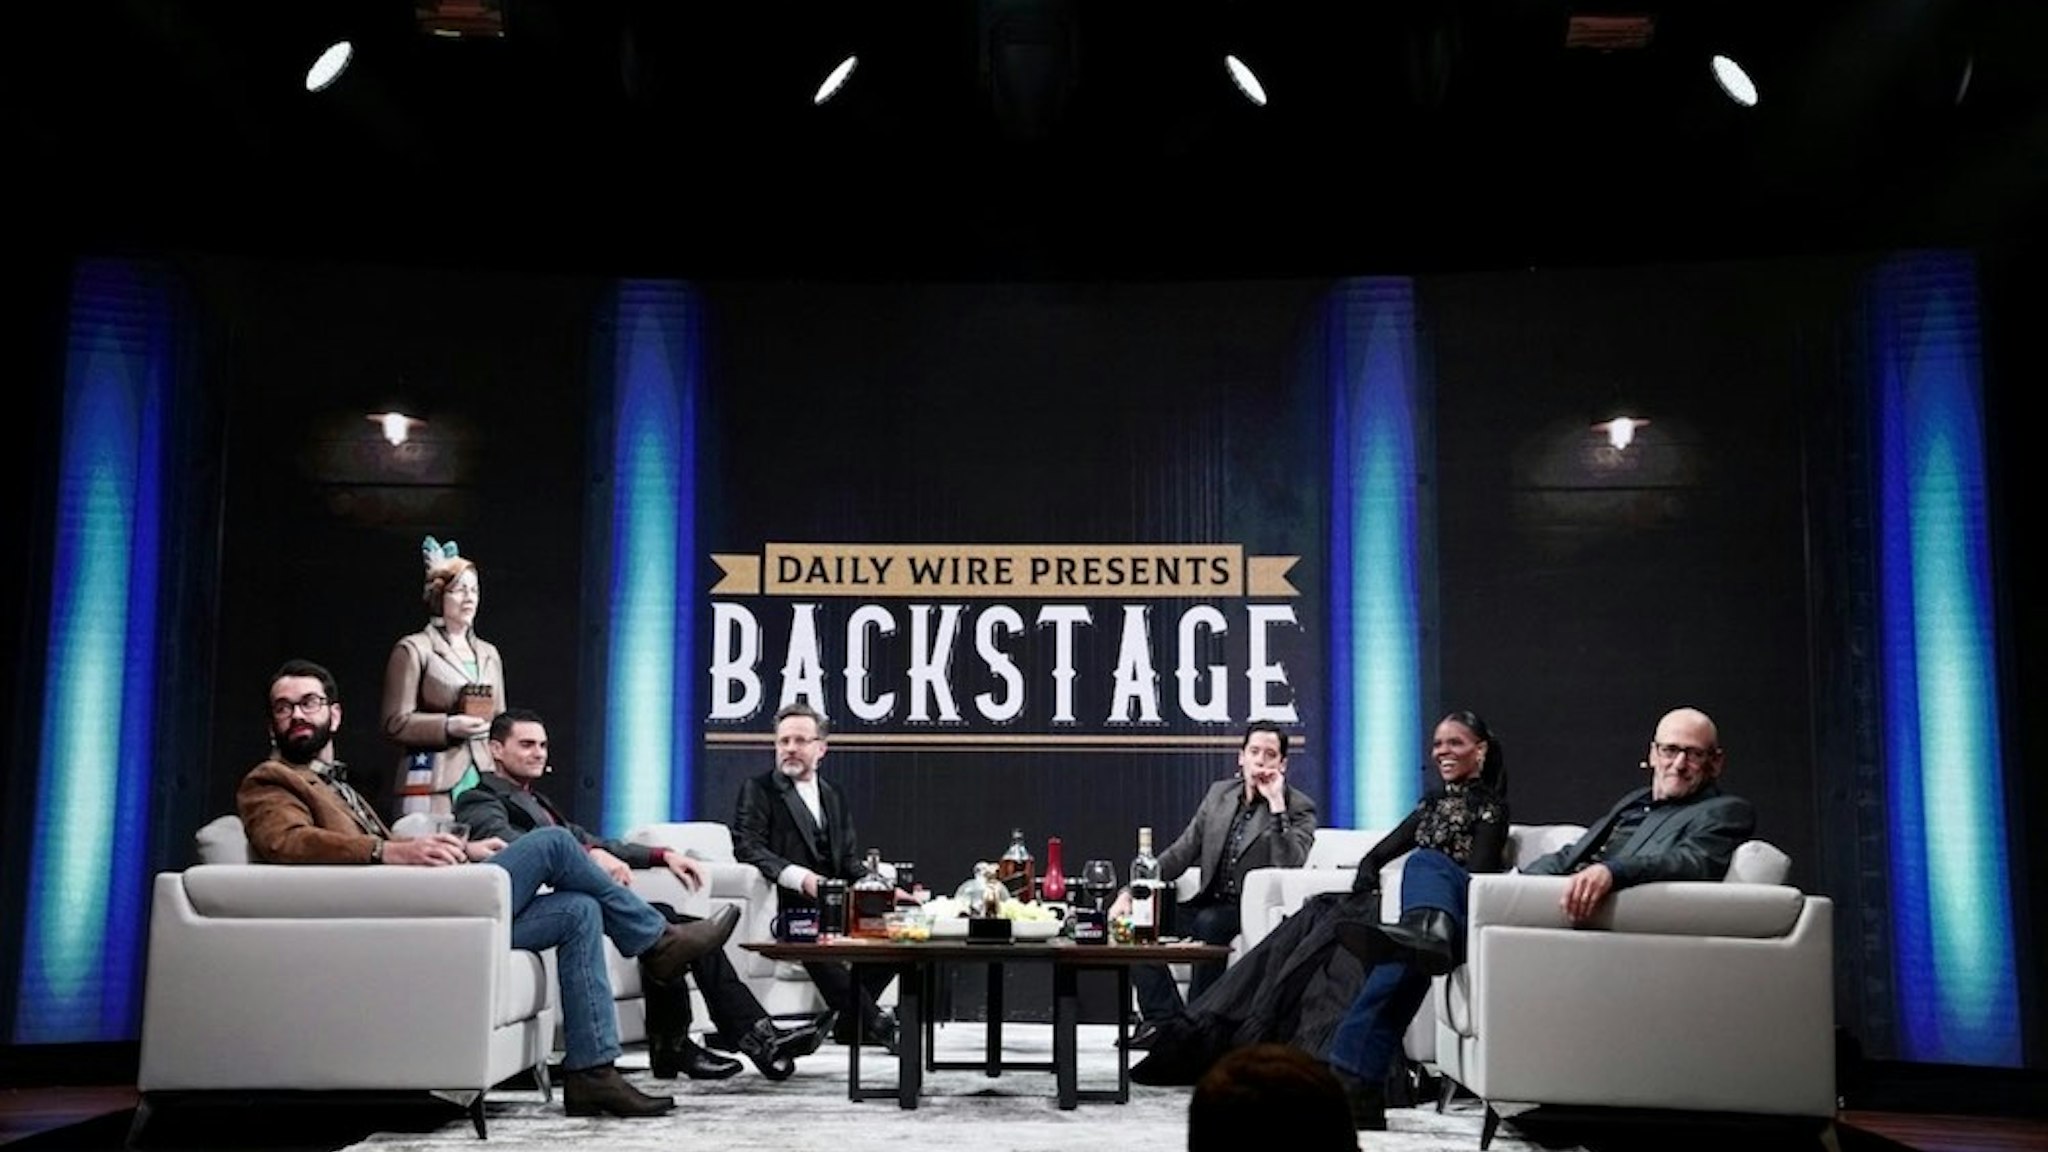 October 12: (L-R) The Daily Wire's Matt Walsh, Ben Shapiro, Jeremy Boreing, Michael Knowles, Candace Owens, and Andrew Klavan appear live at the Ryman Auditorium in Nashville for "Backstage Live at the Ryman." (Credit: The Daily Wire)